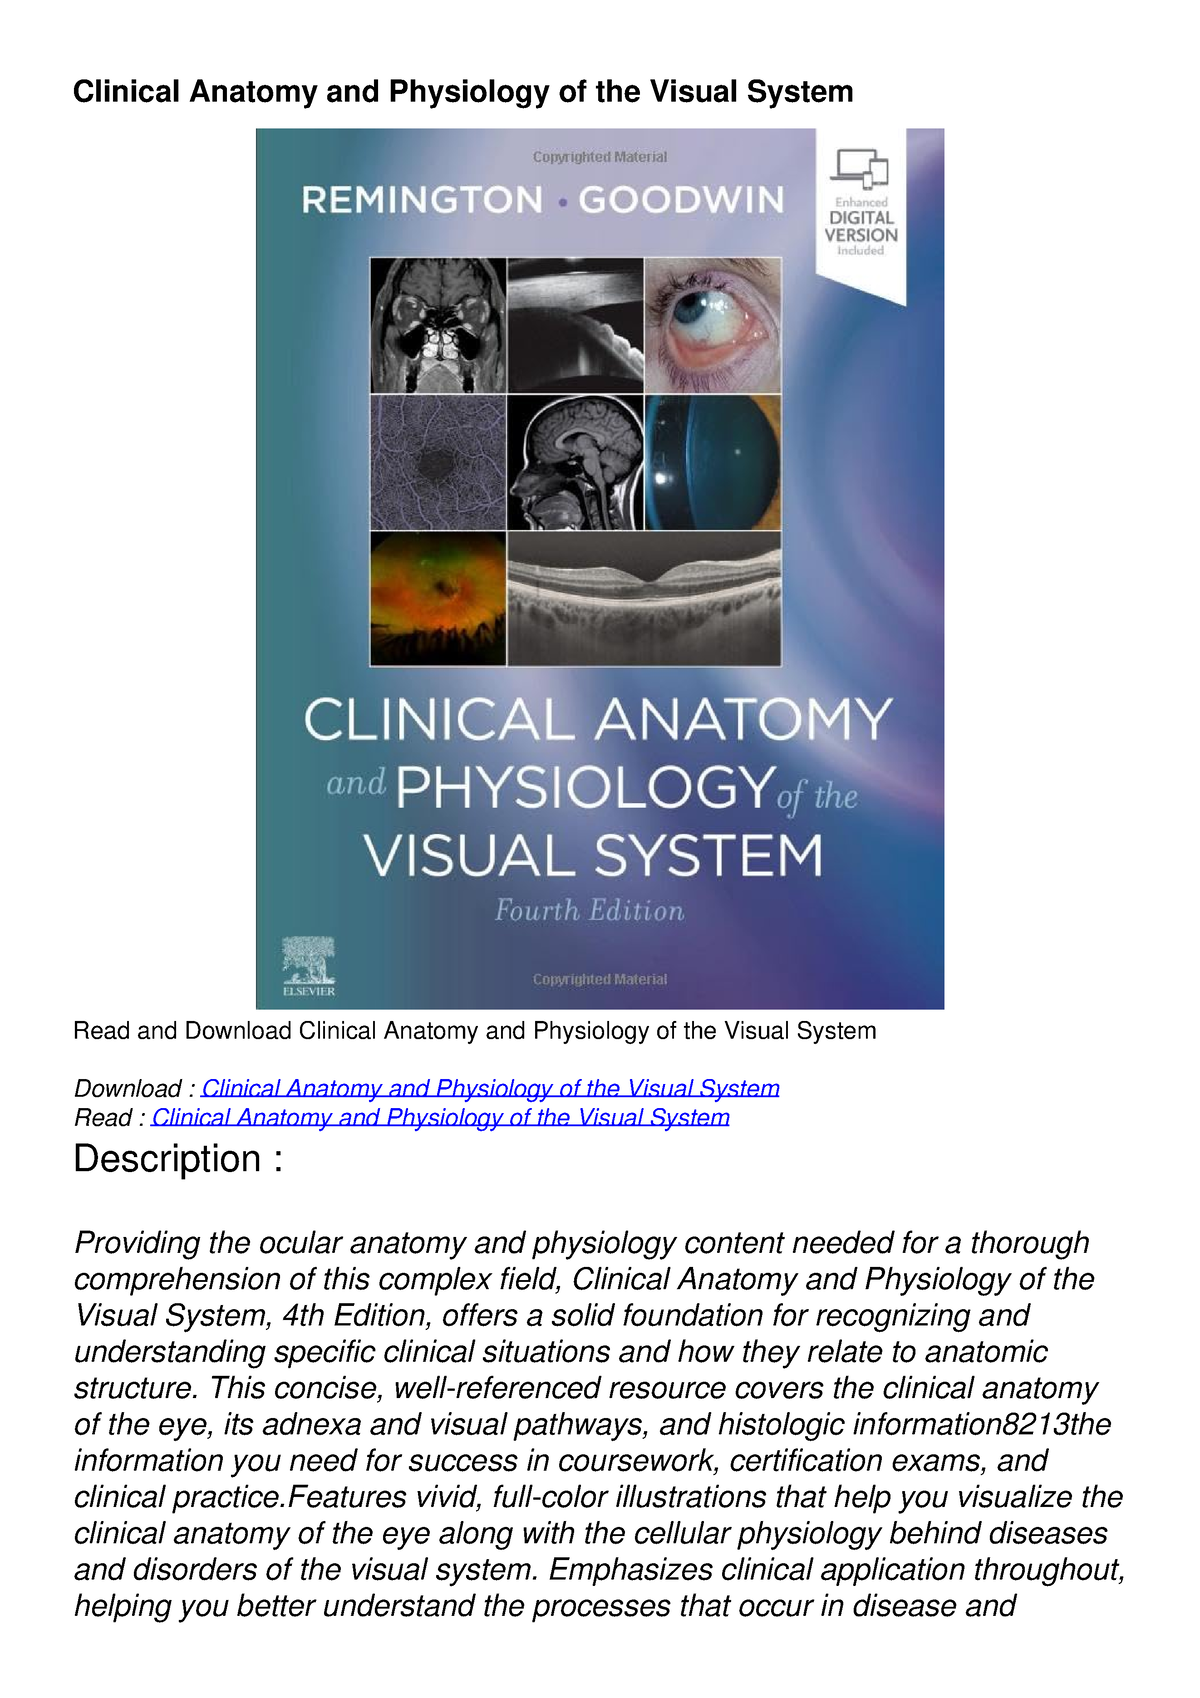 Audiobook Clinical Anatomy and Physiology of the Visual System